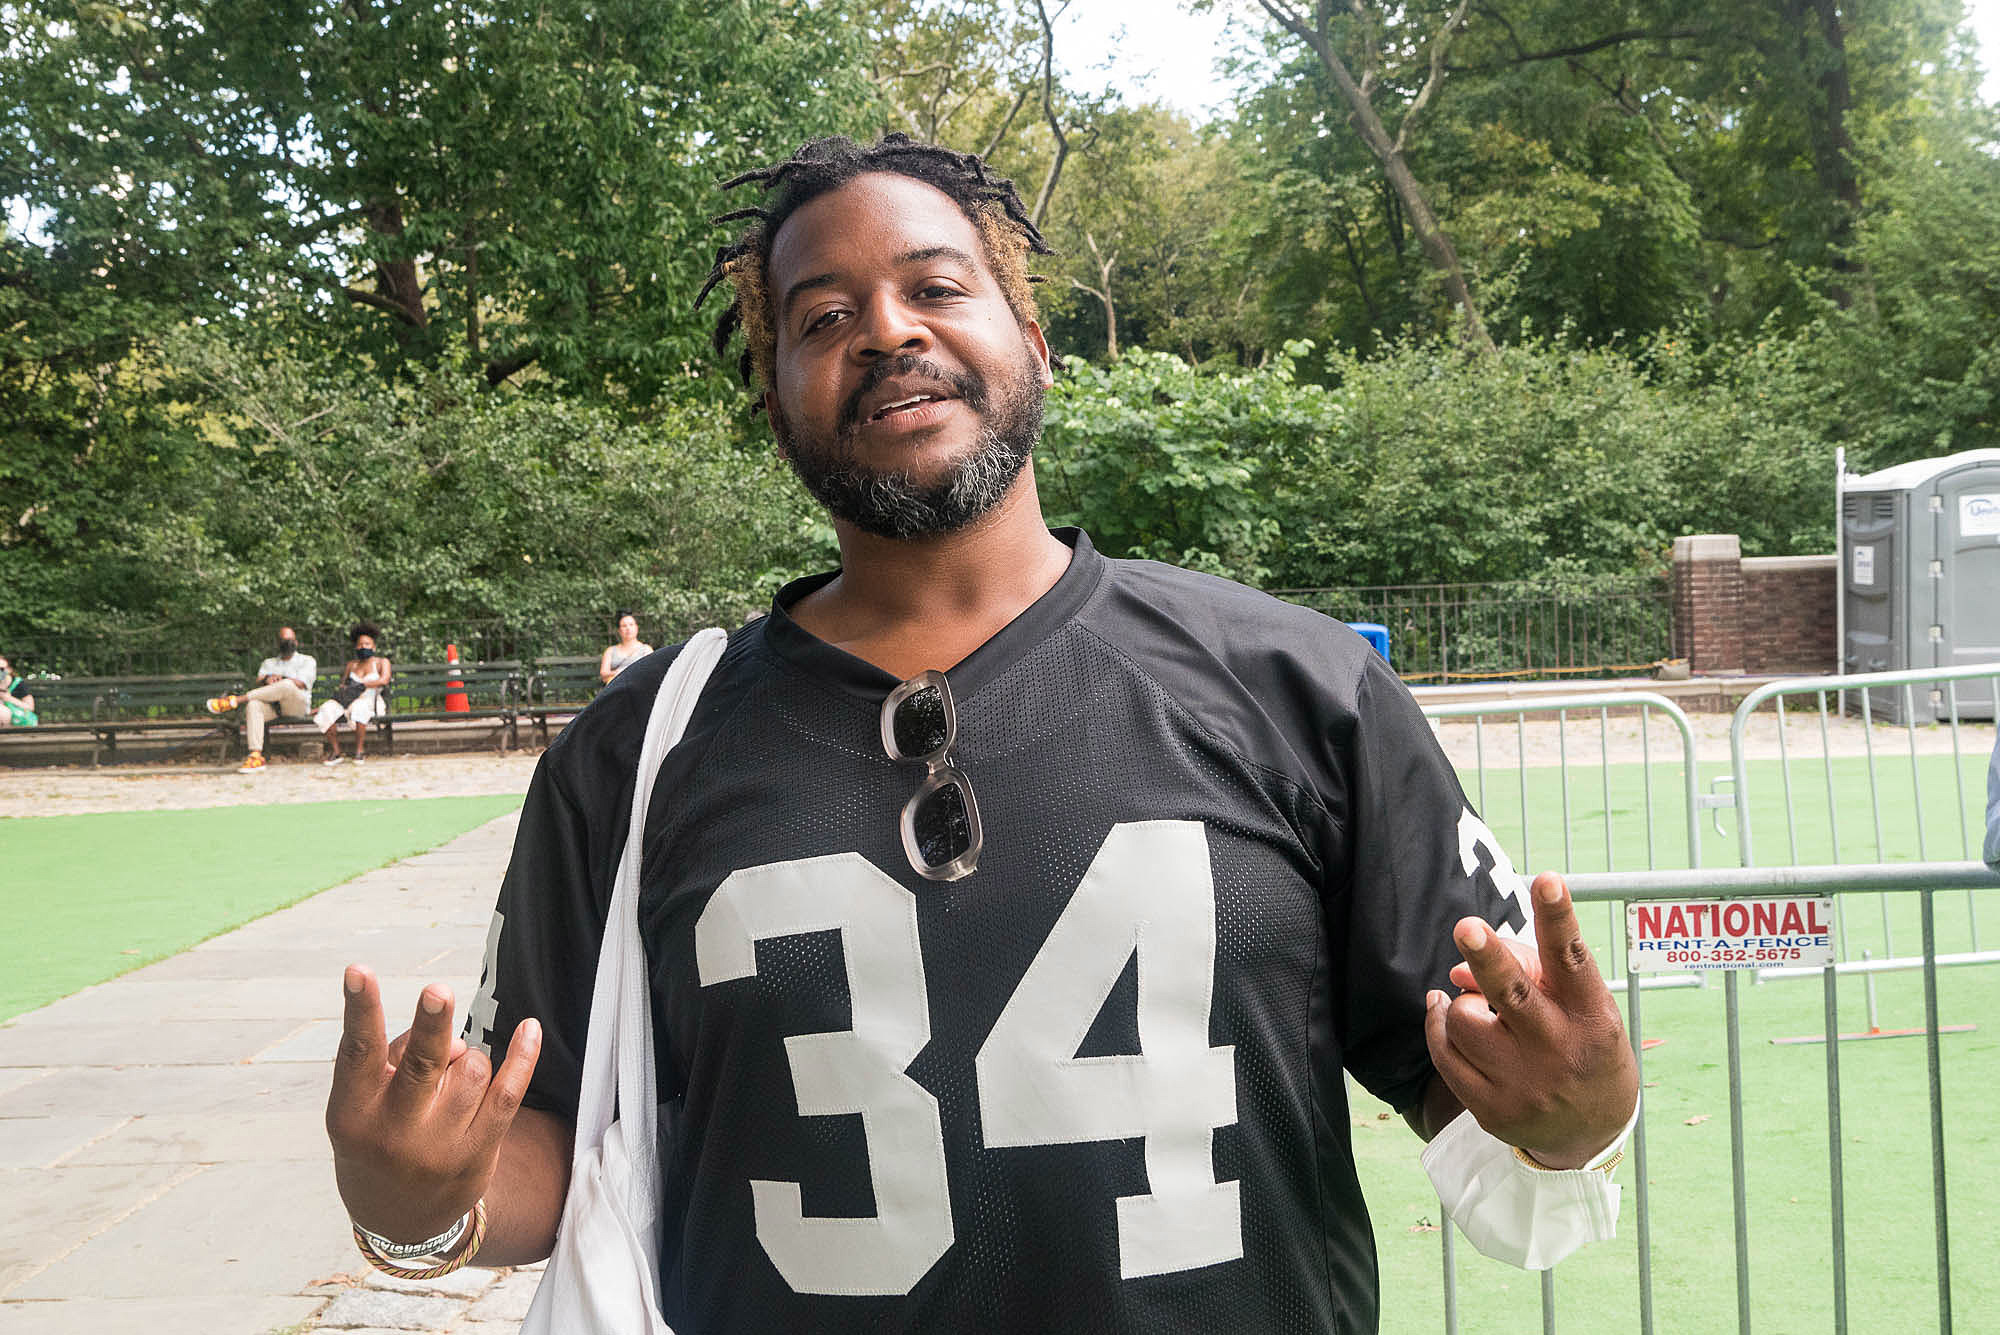 Armand Hammer, Alchemist, Moor Mother & friends took over SummerStage in  Central Park (pics)